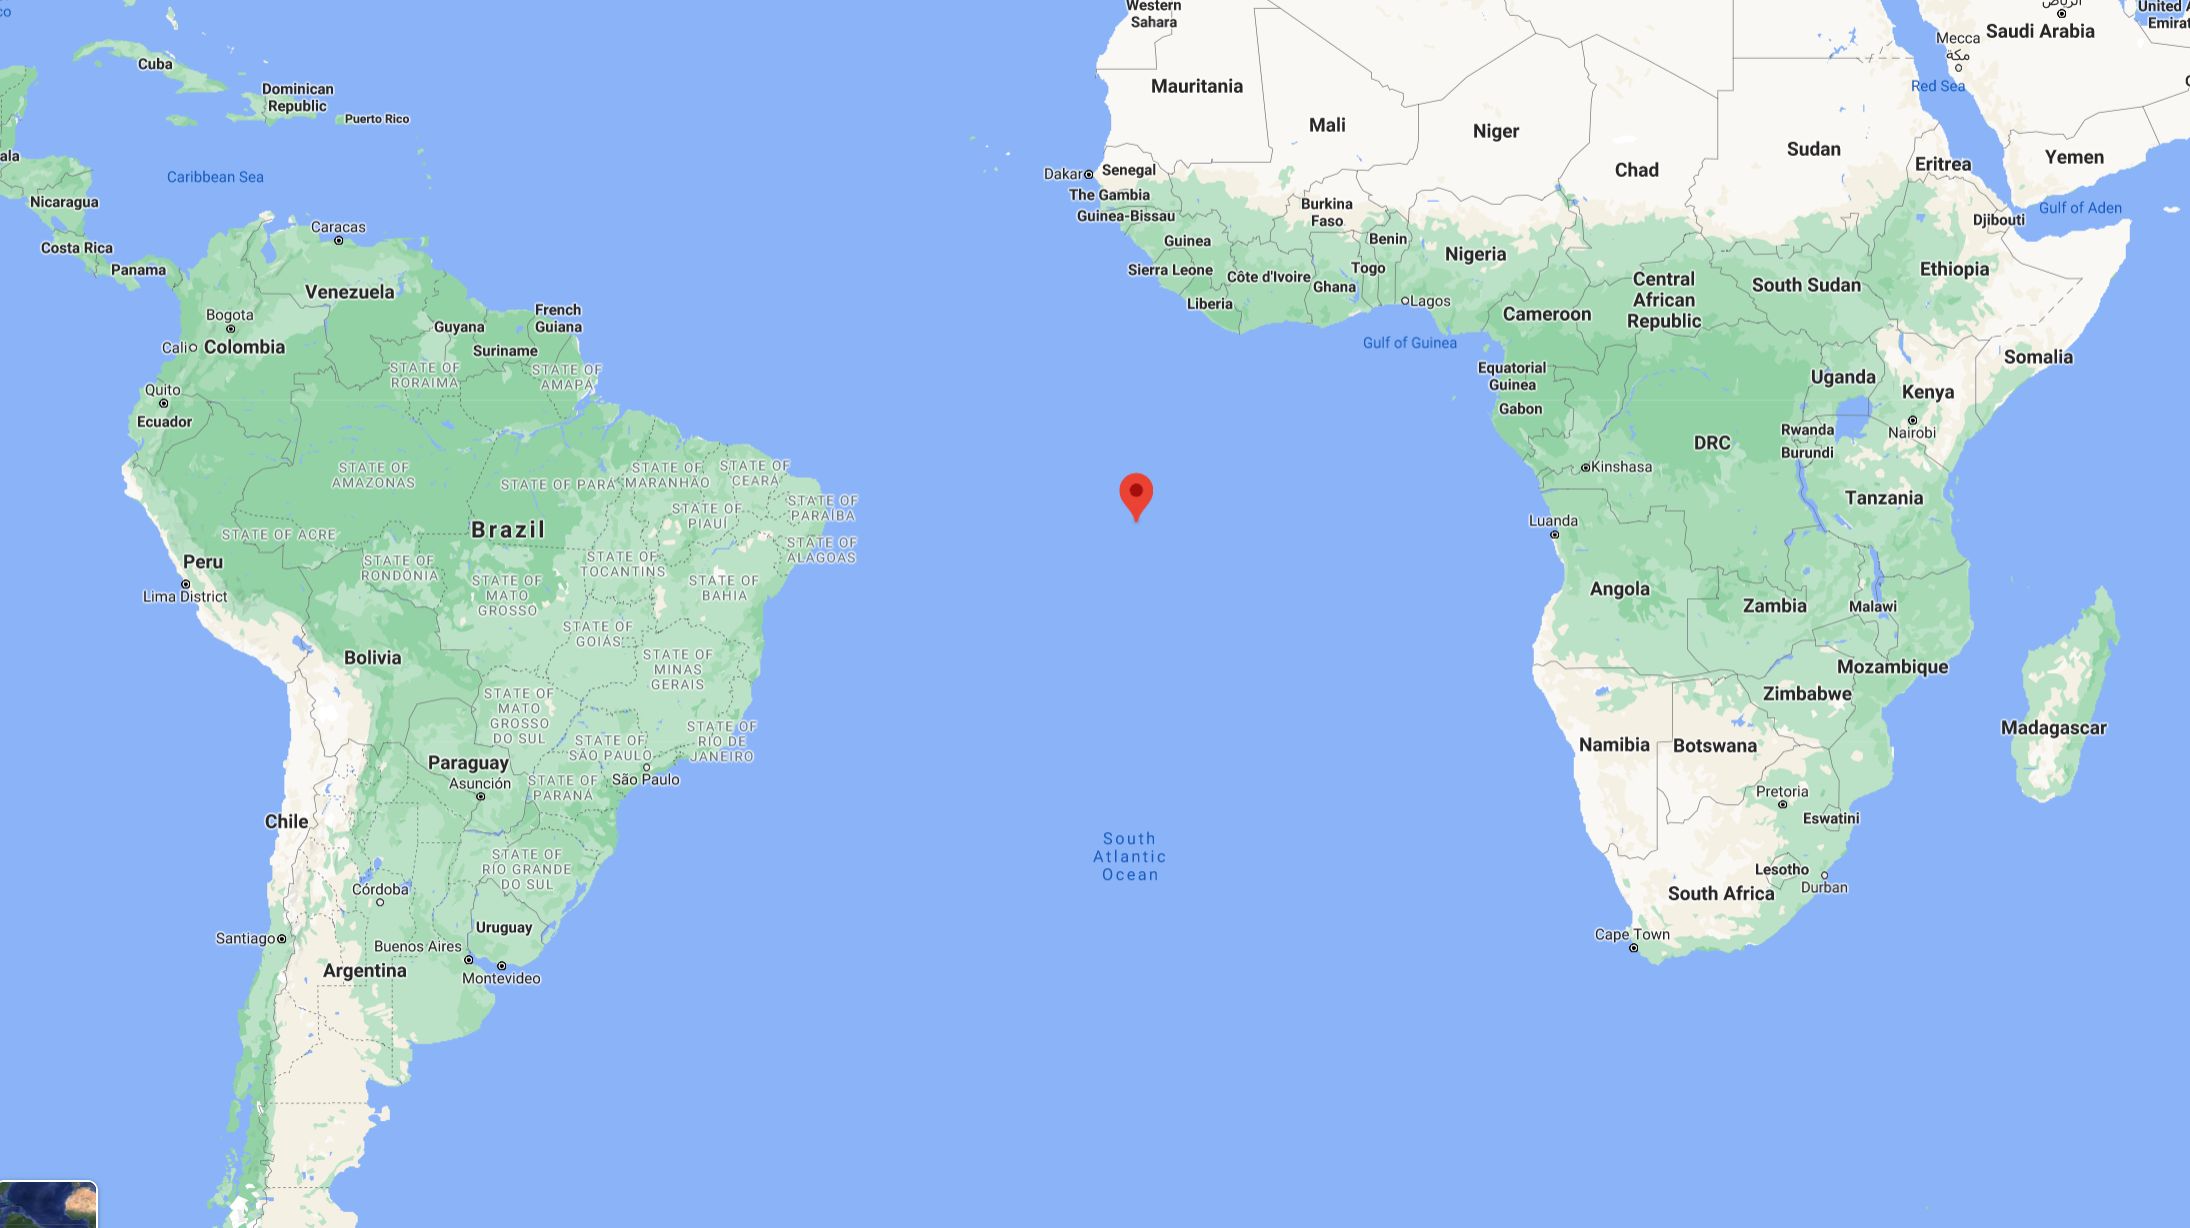 north of ascension island